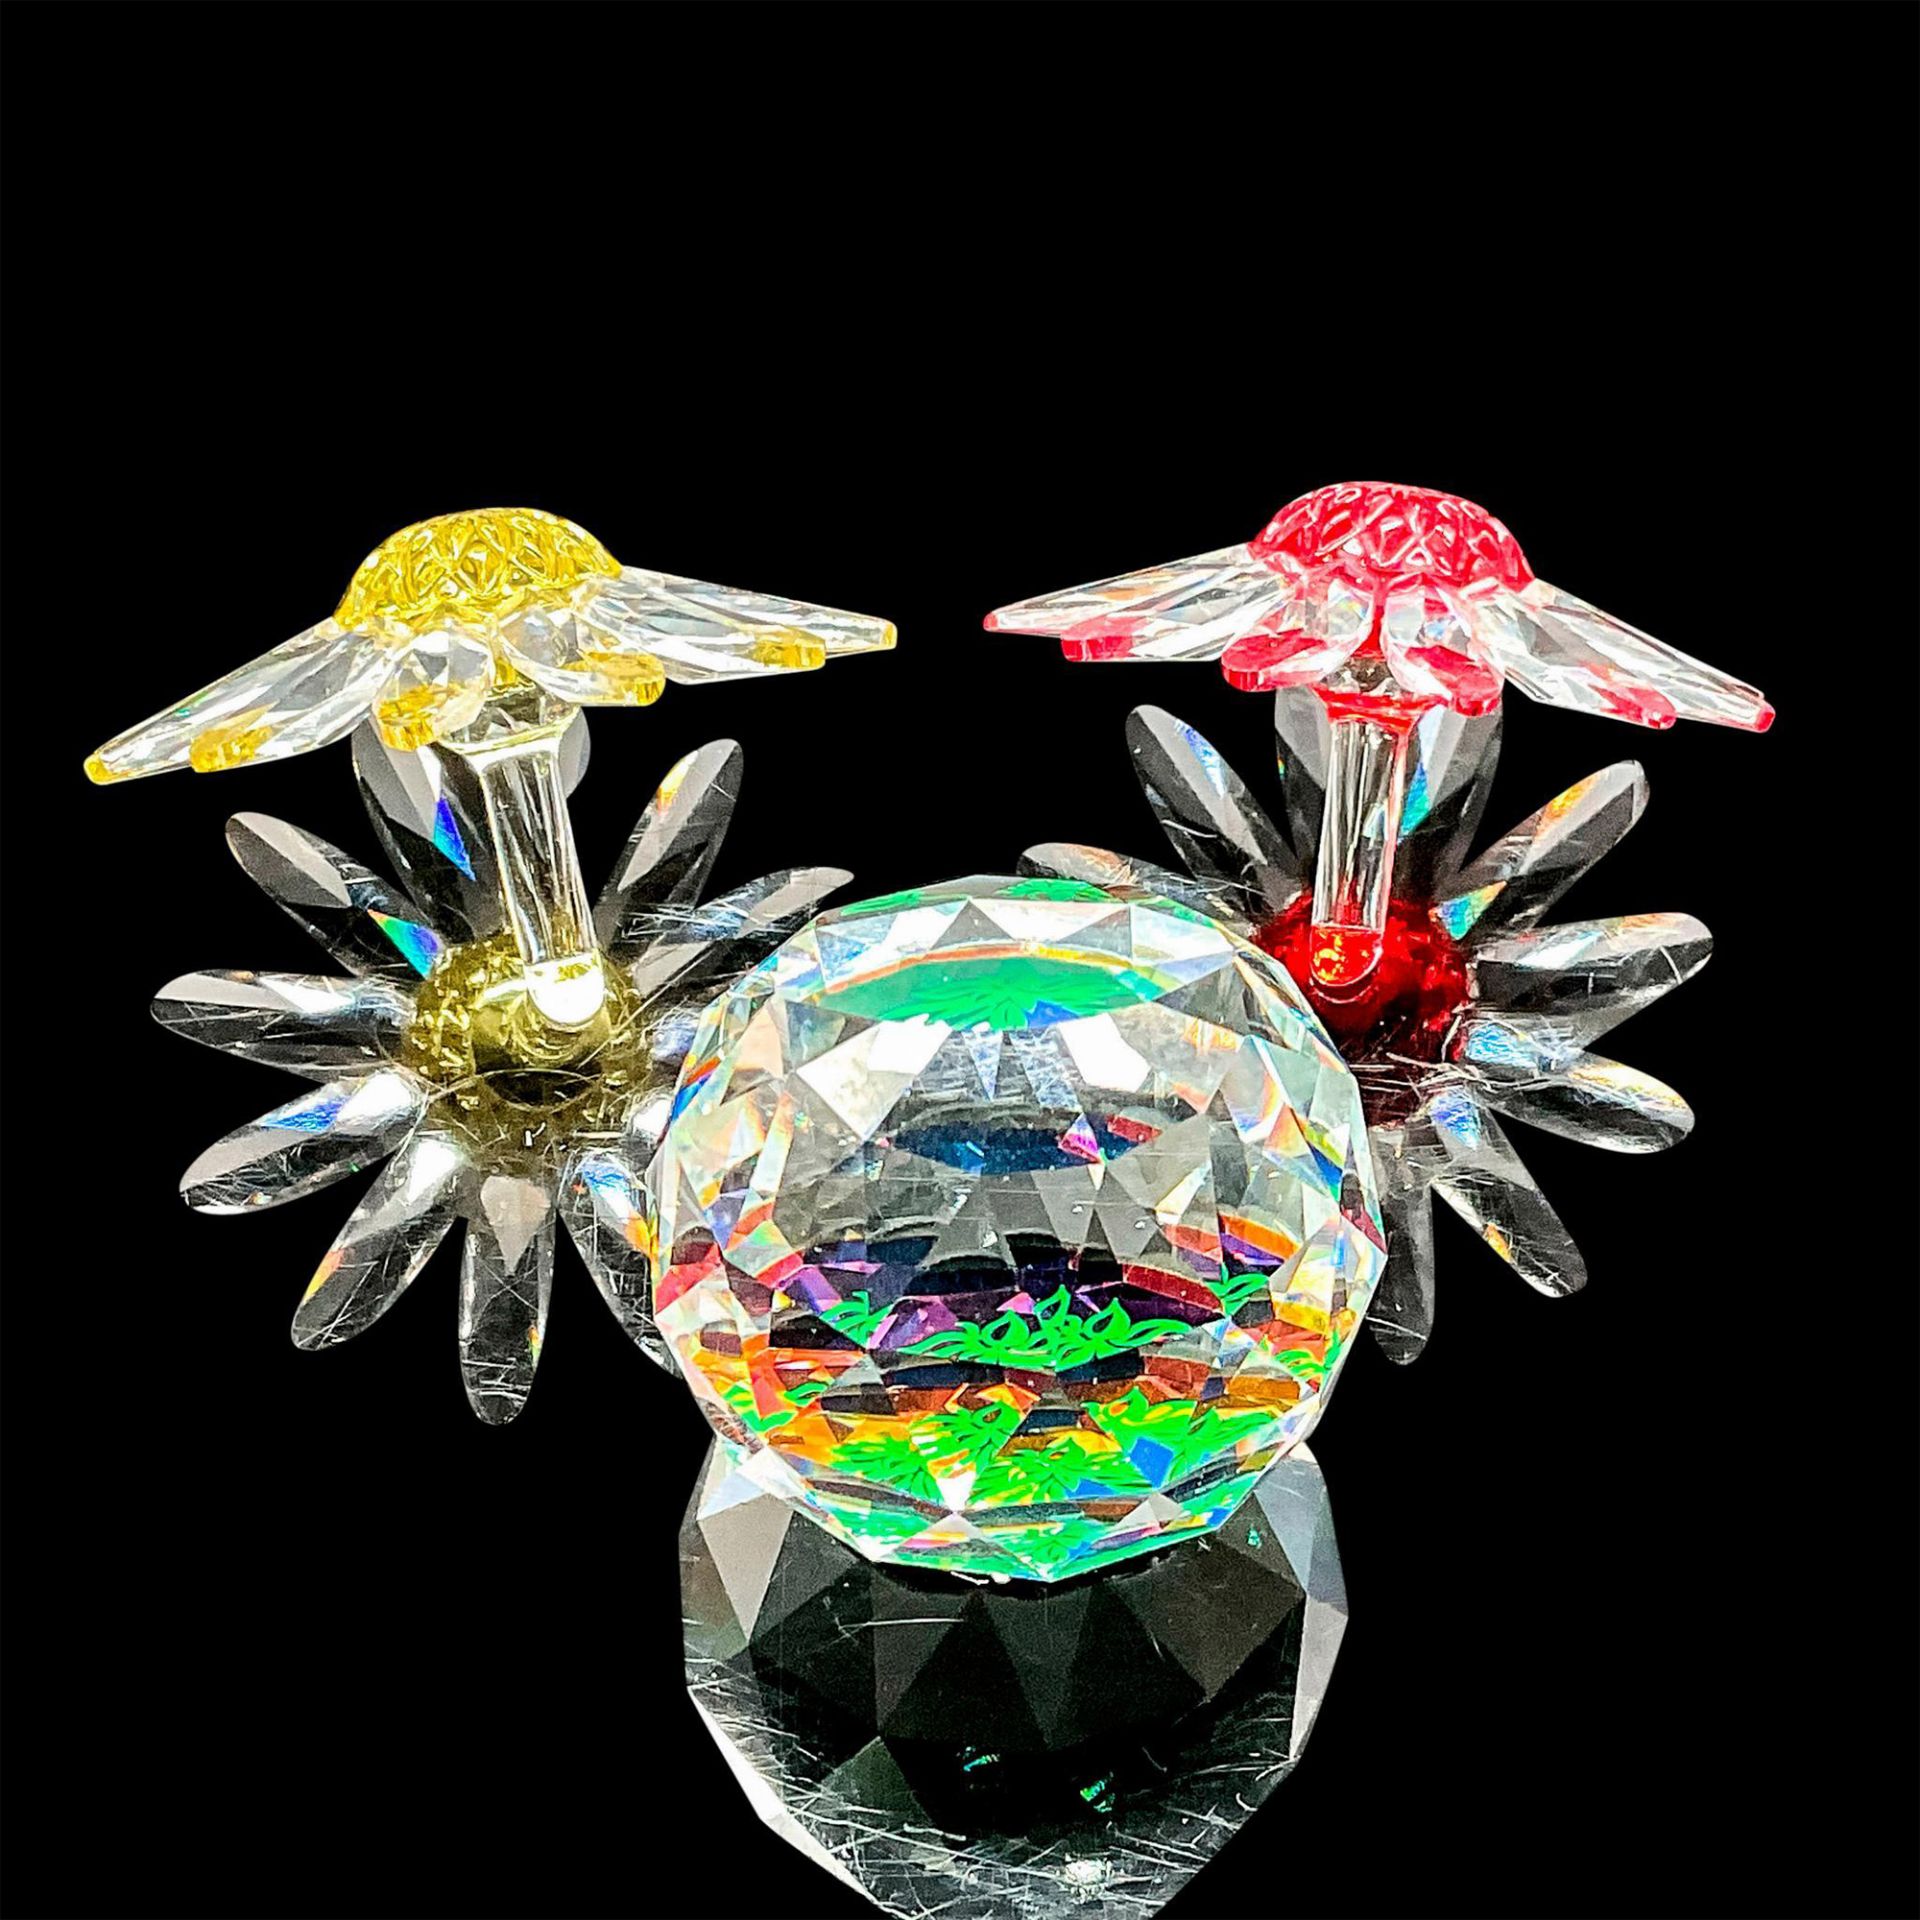 3pc Swarovski Crystal Figurines, Flowers and Paperweight - Image 2 of 3